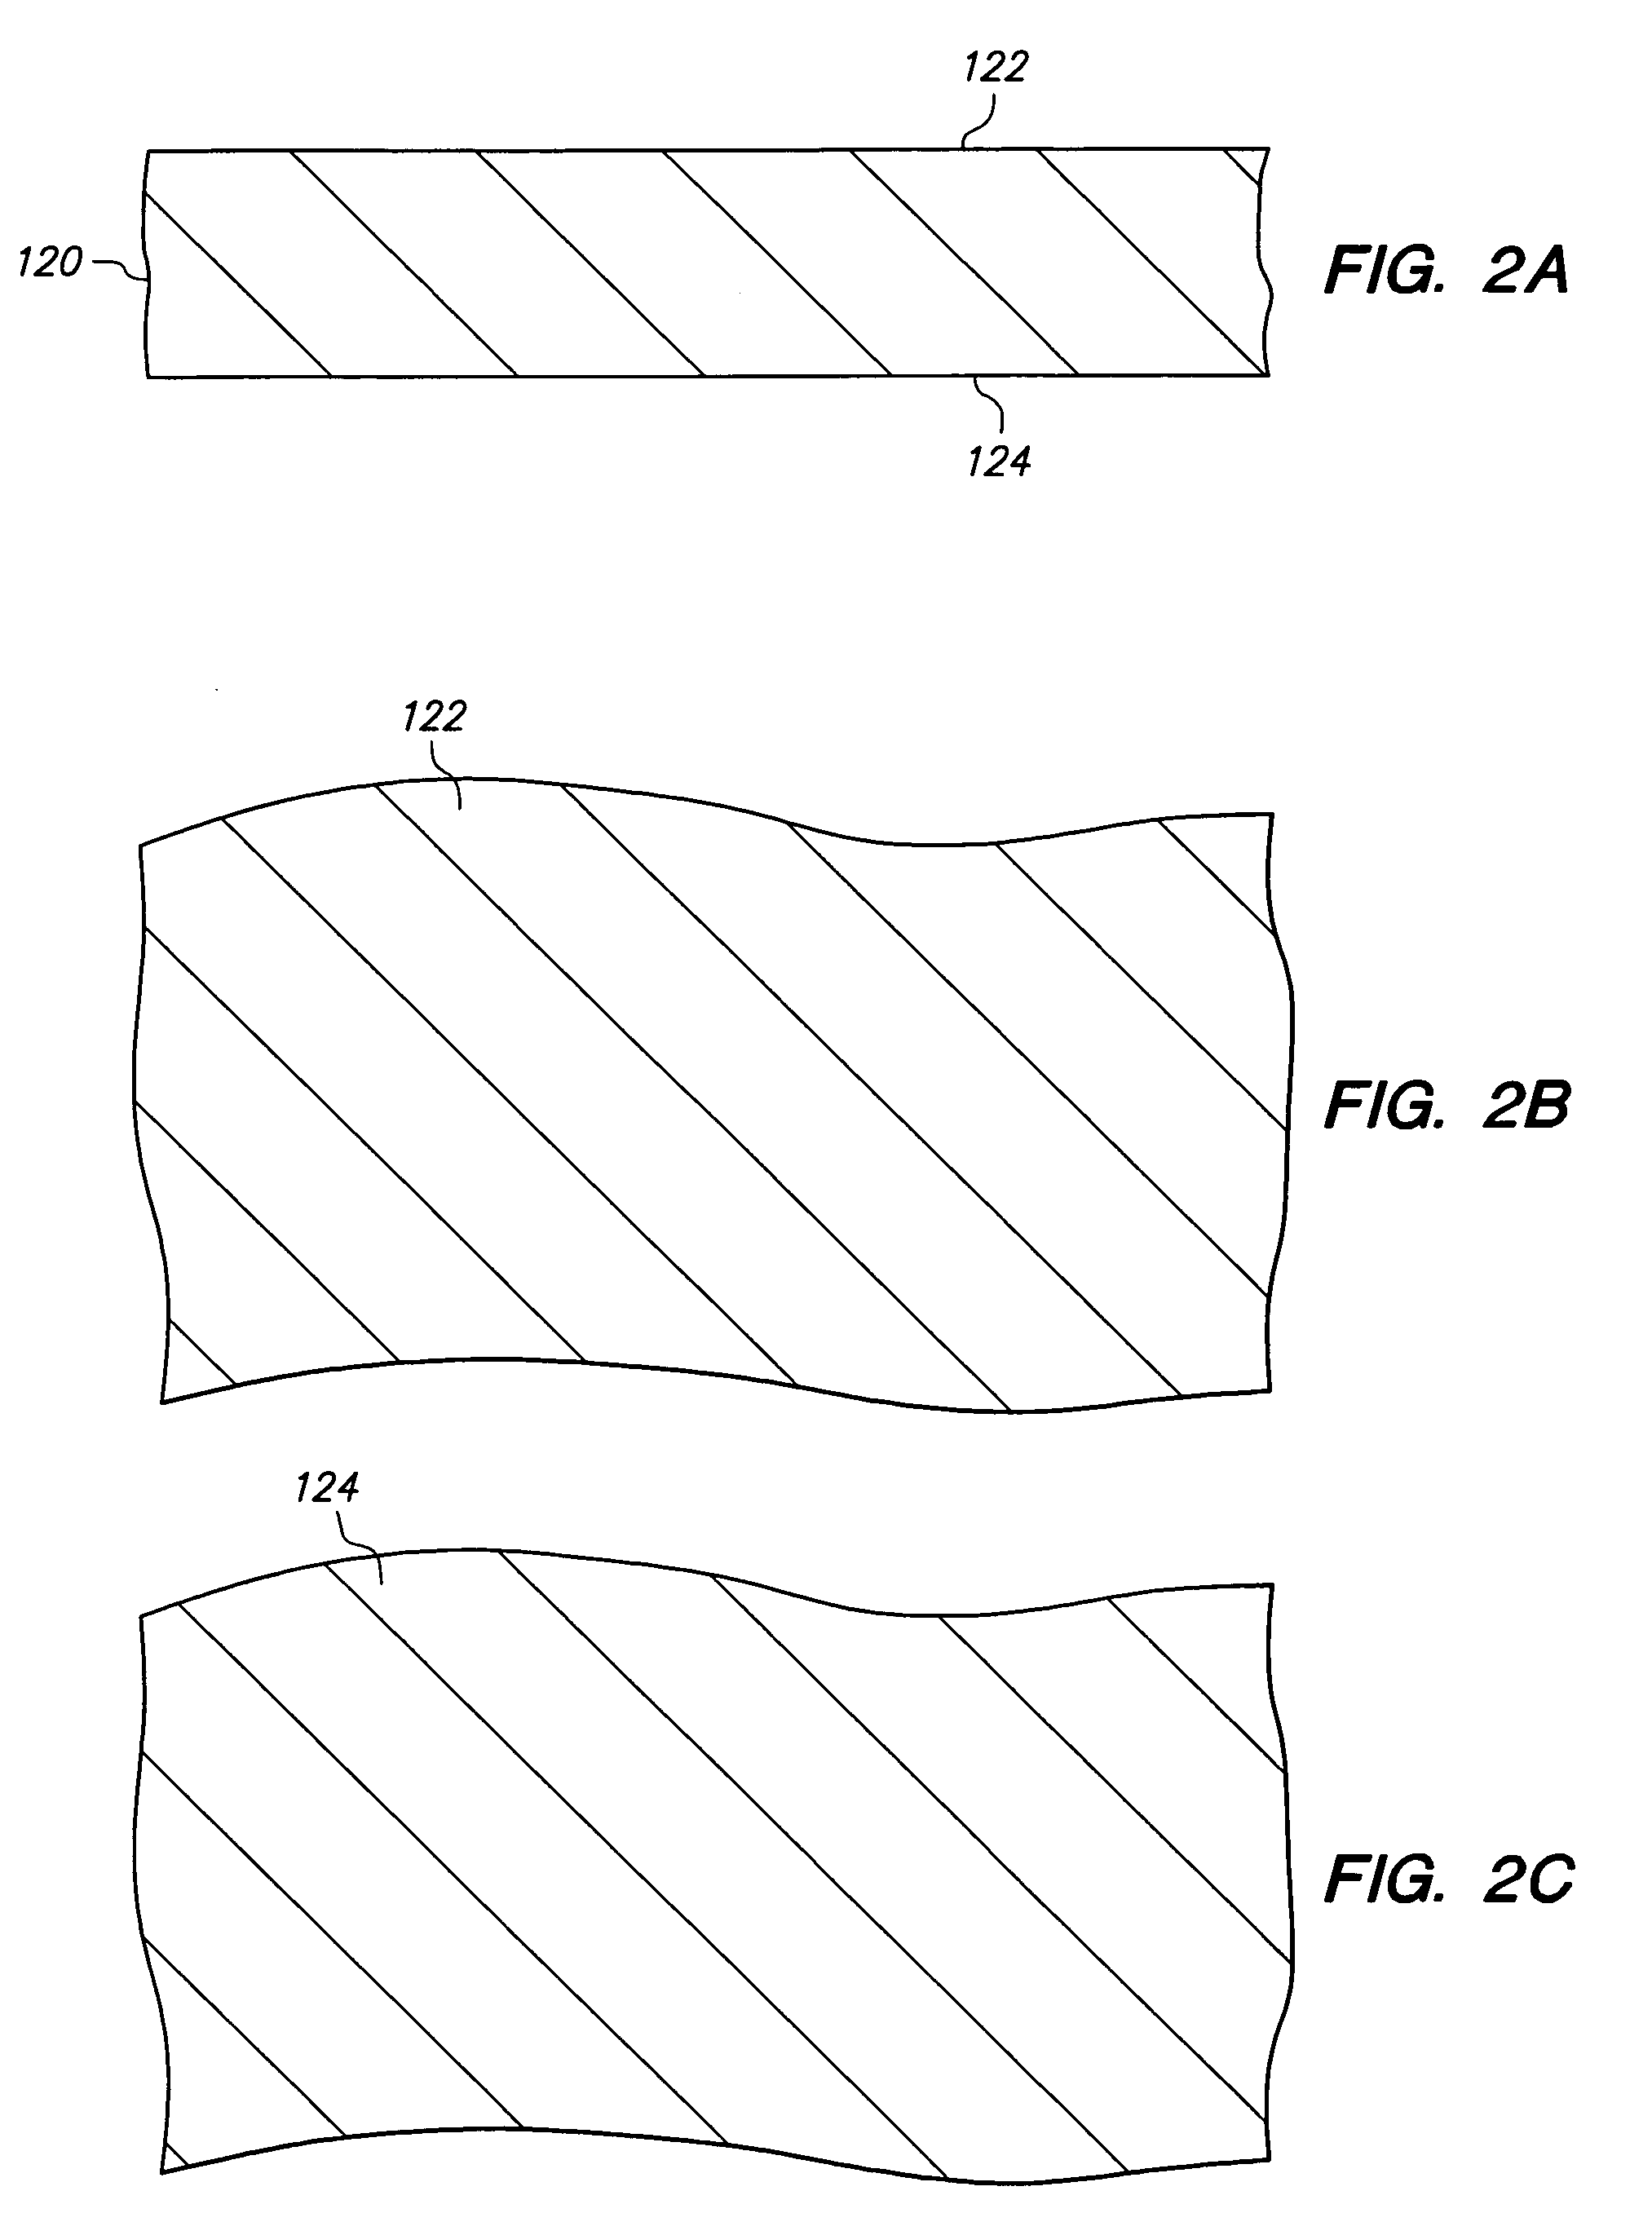 Method of making a three-dimensional stacked semiconductor package with a metal pillar and a conductive interconnect in an encapsulant aperture